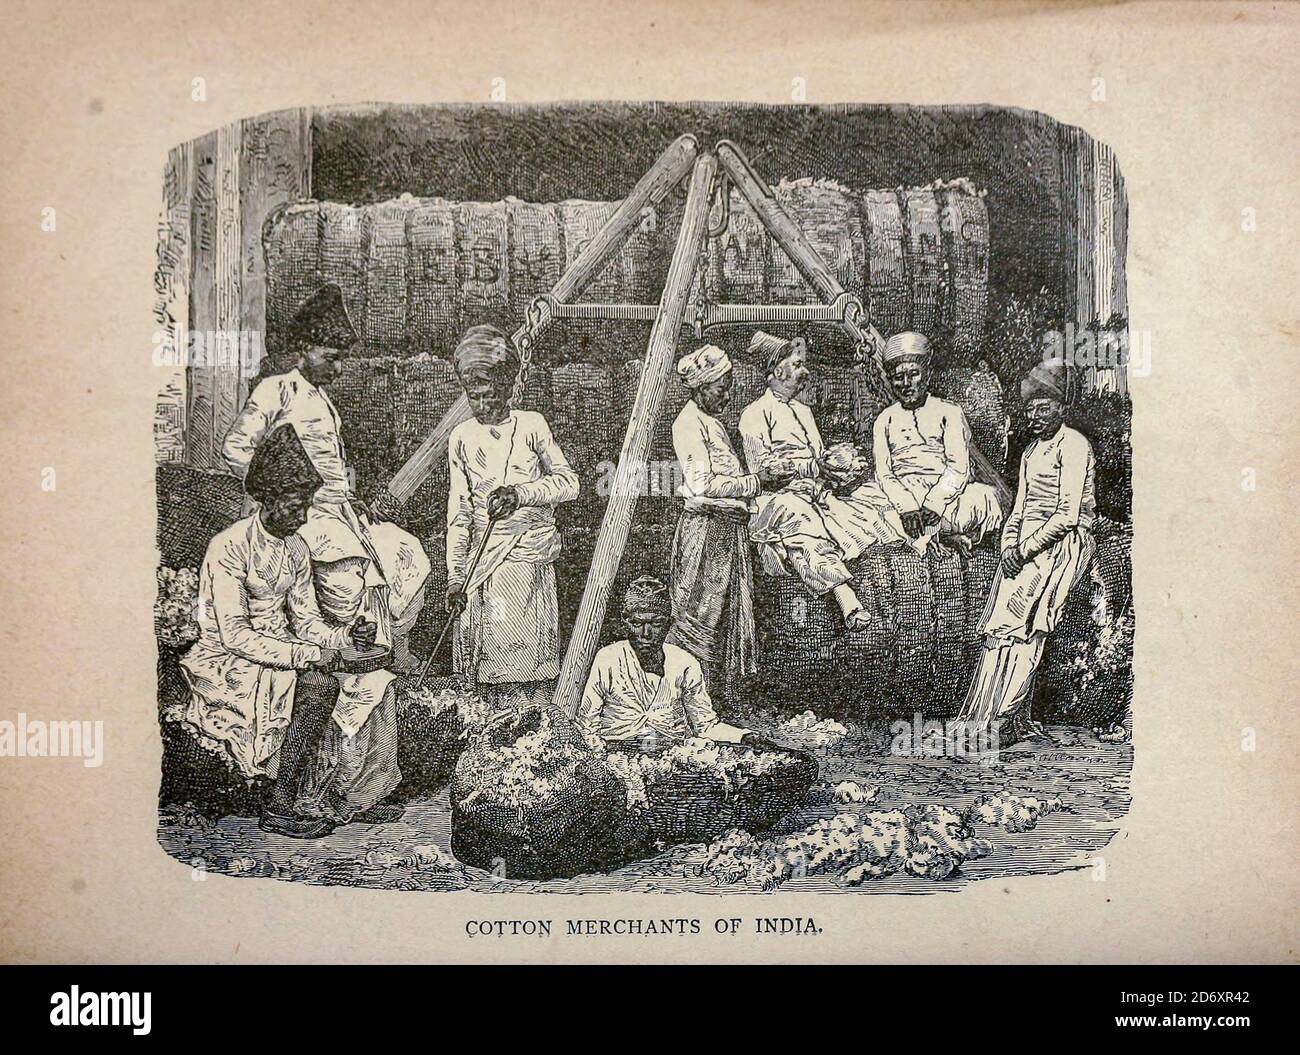 Cotton Merchants of India  from The merchant vessel : a sailor boy's voyages to see the world [around the world] by Nordhoff, Charles, 1830-1901 engraved by C. LaPlante; some illustrations by W.L. Wyllie Publisher New York : Dodd, Mead & Co. 1884 Stock Photo